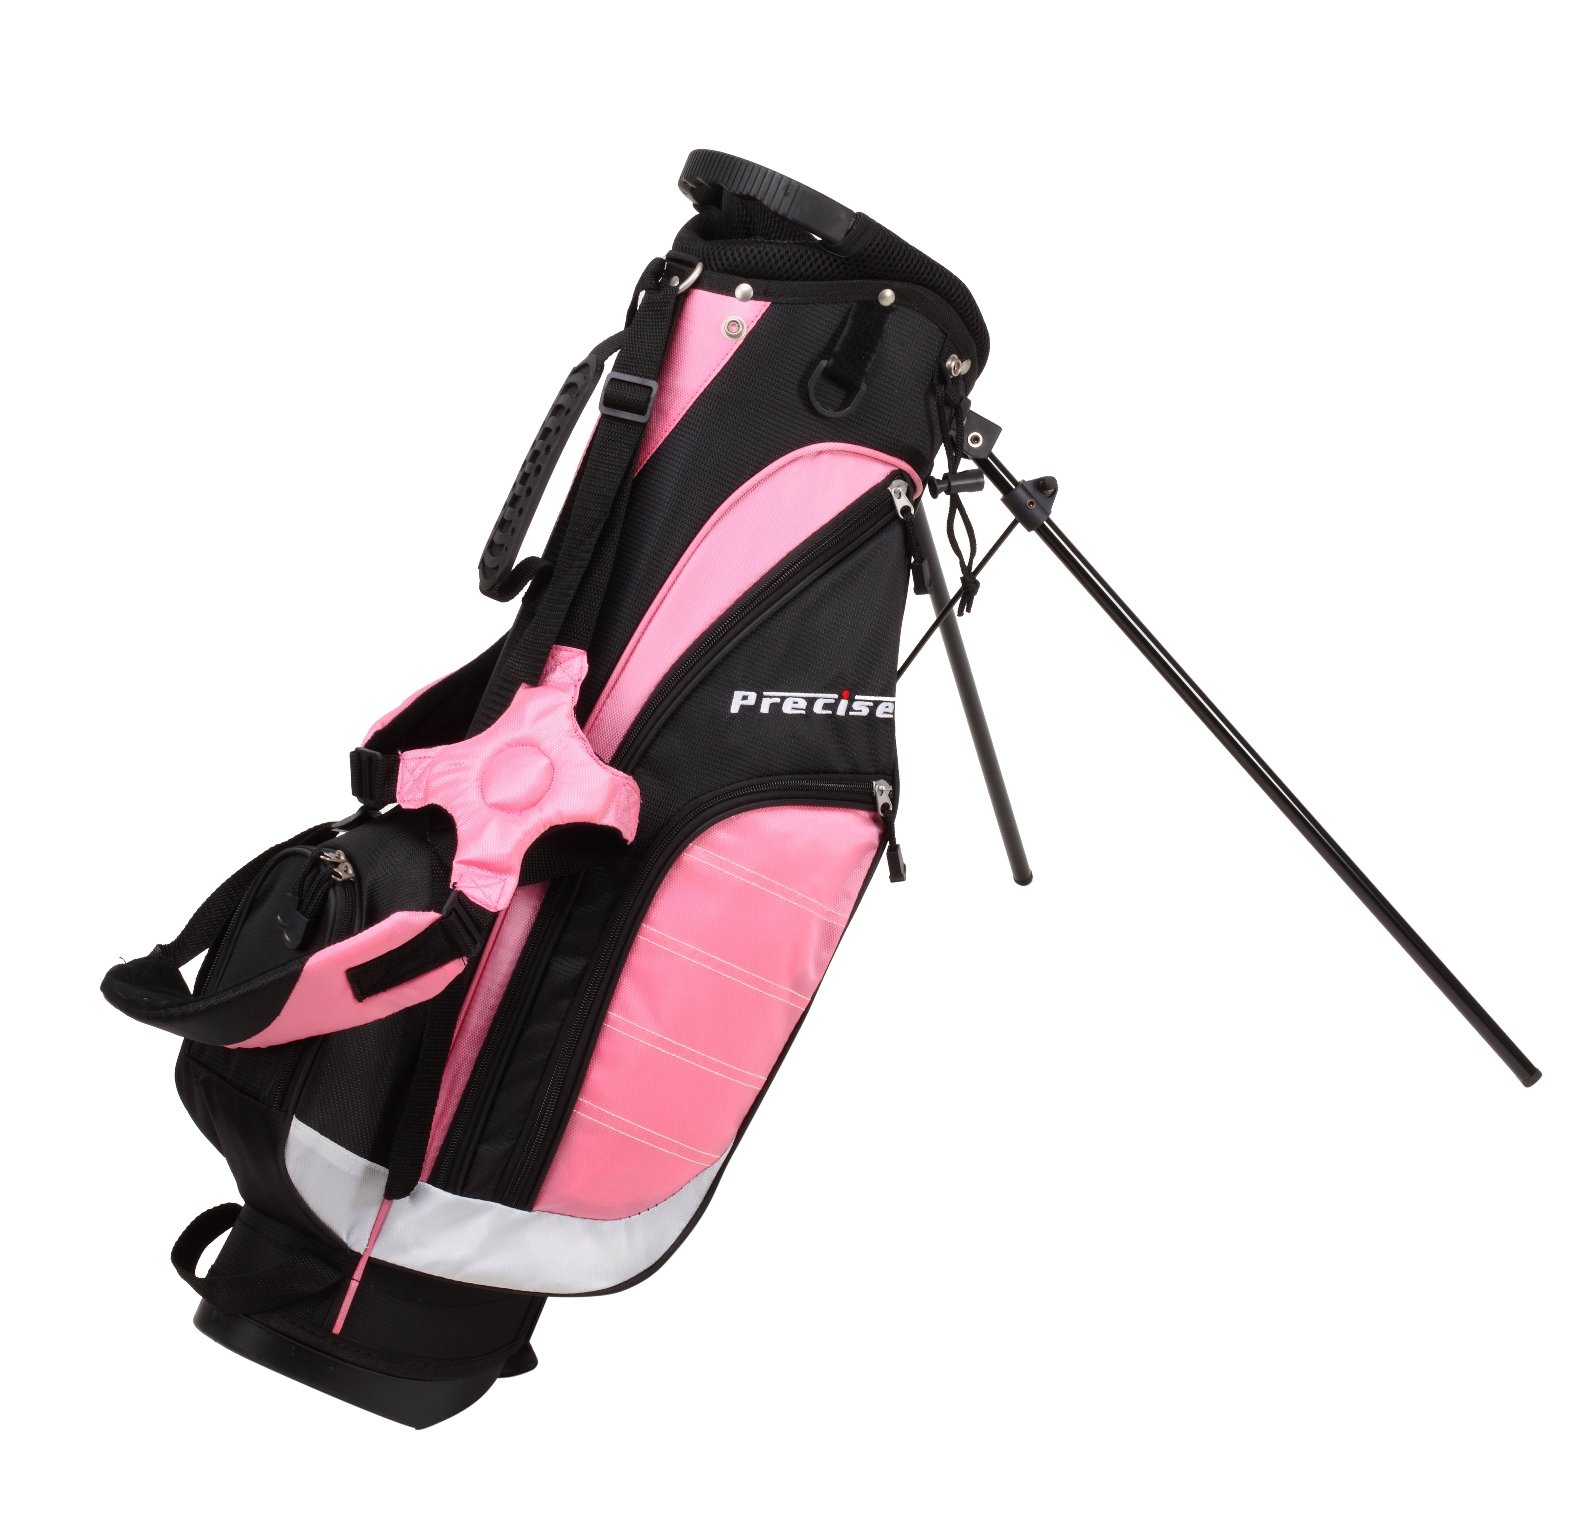 Remarkable Girls Right Handed Pink Junior Golf Club Set for Age 3 to 5 (Height 3' to 3'8